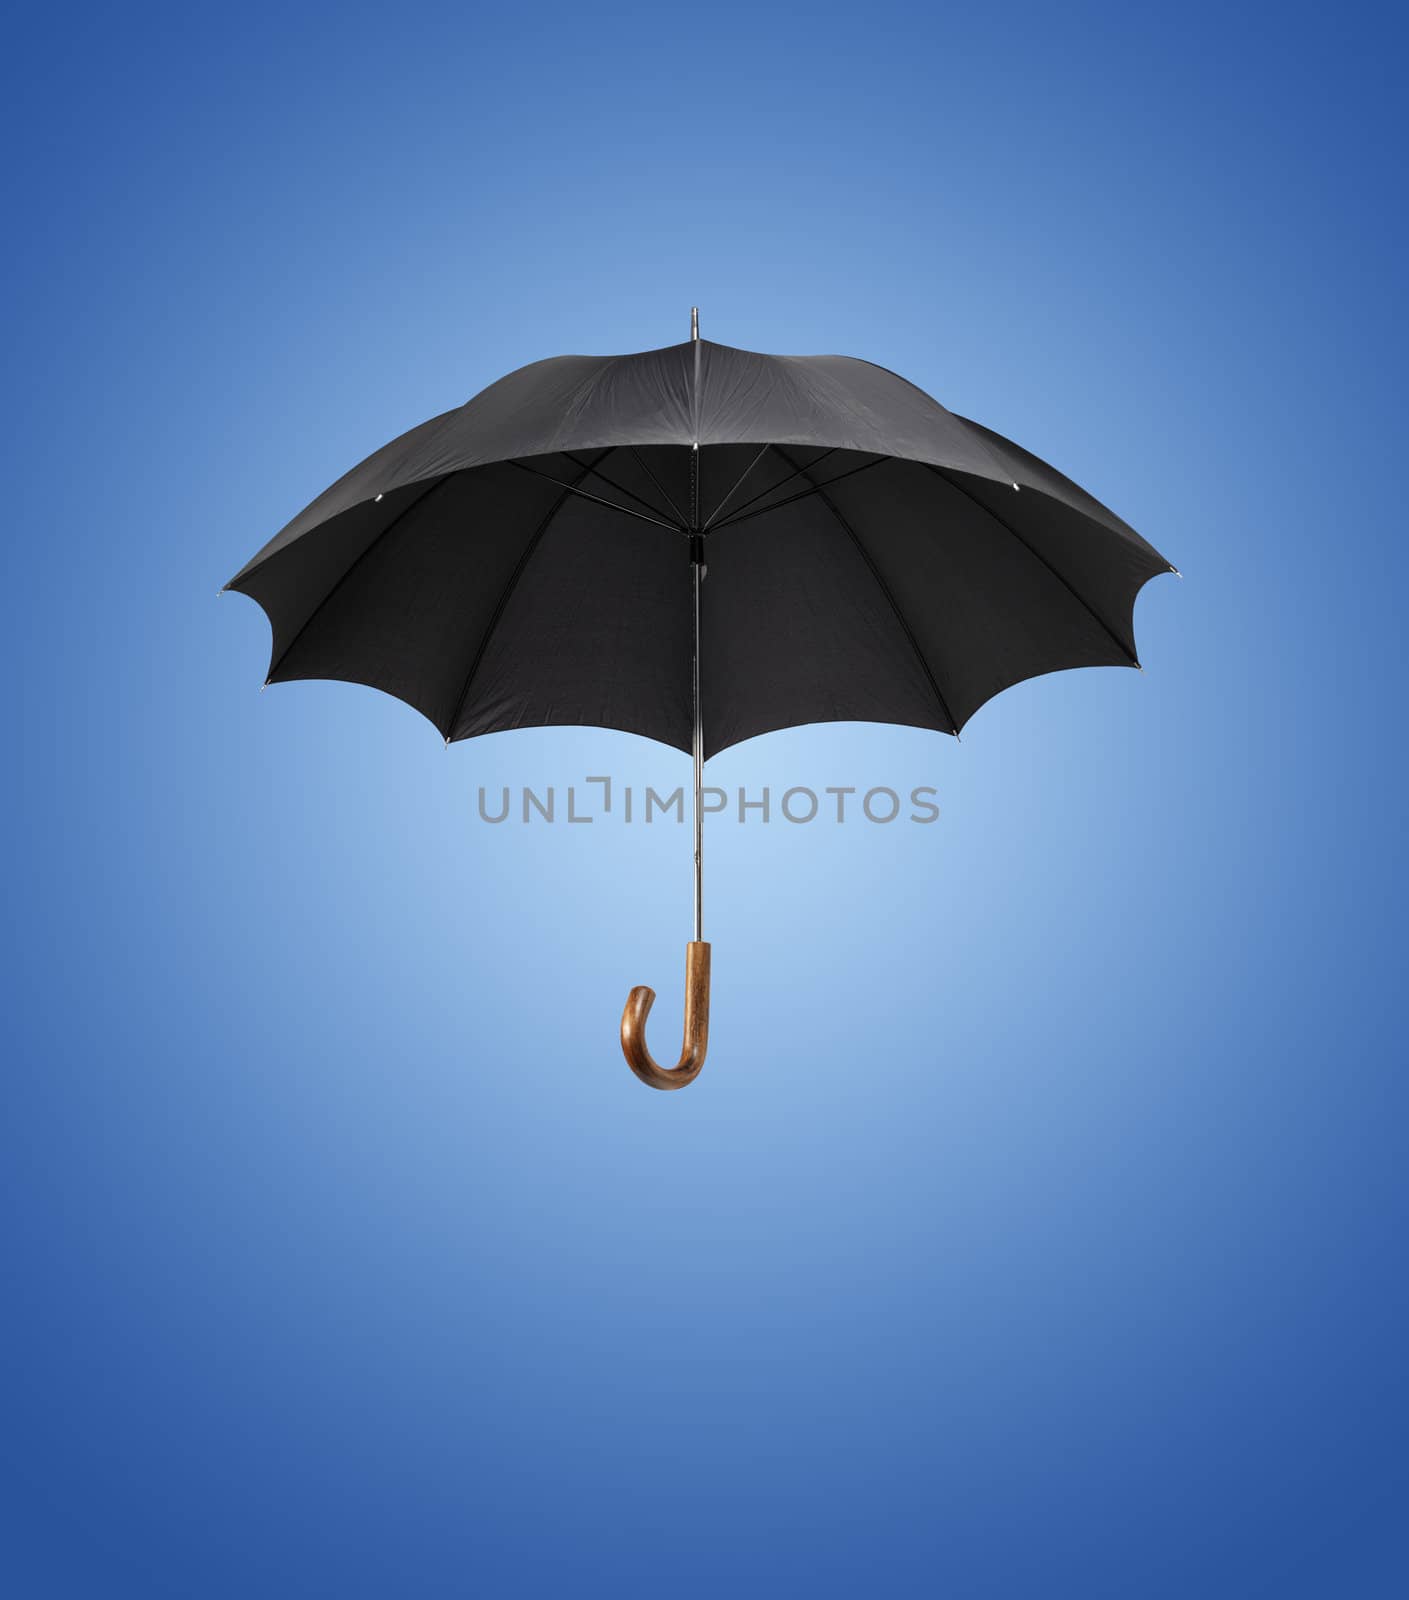 Old Umbrella by Stocksnapper